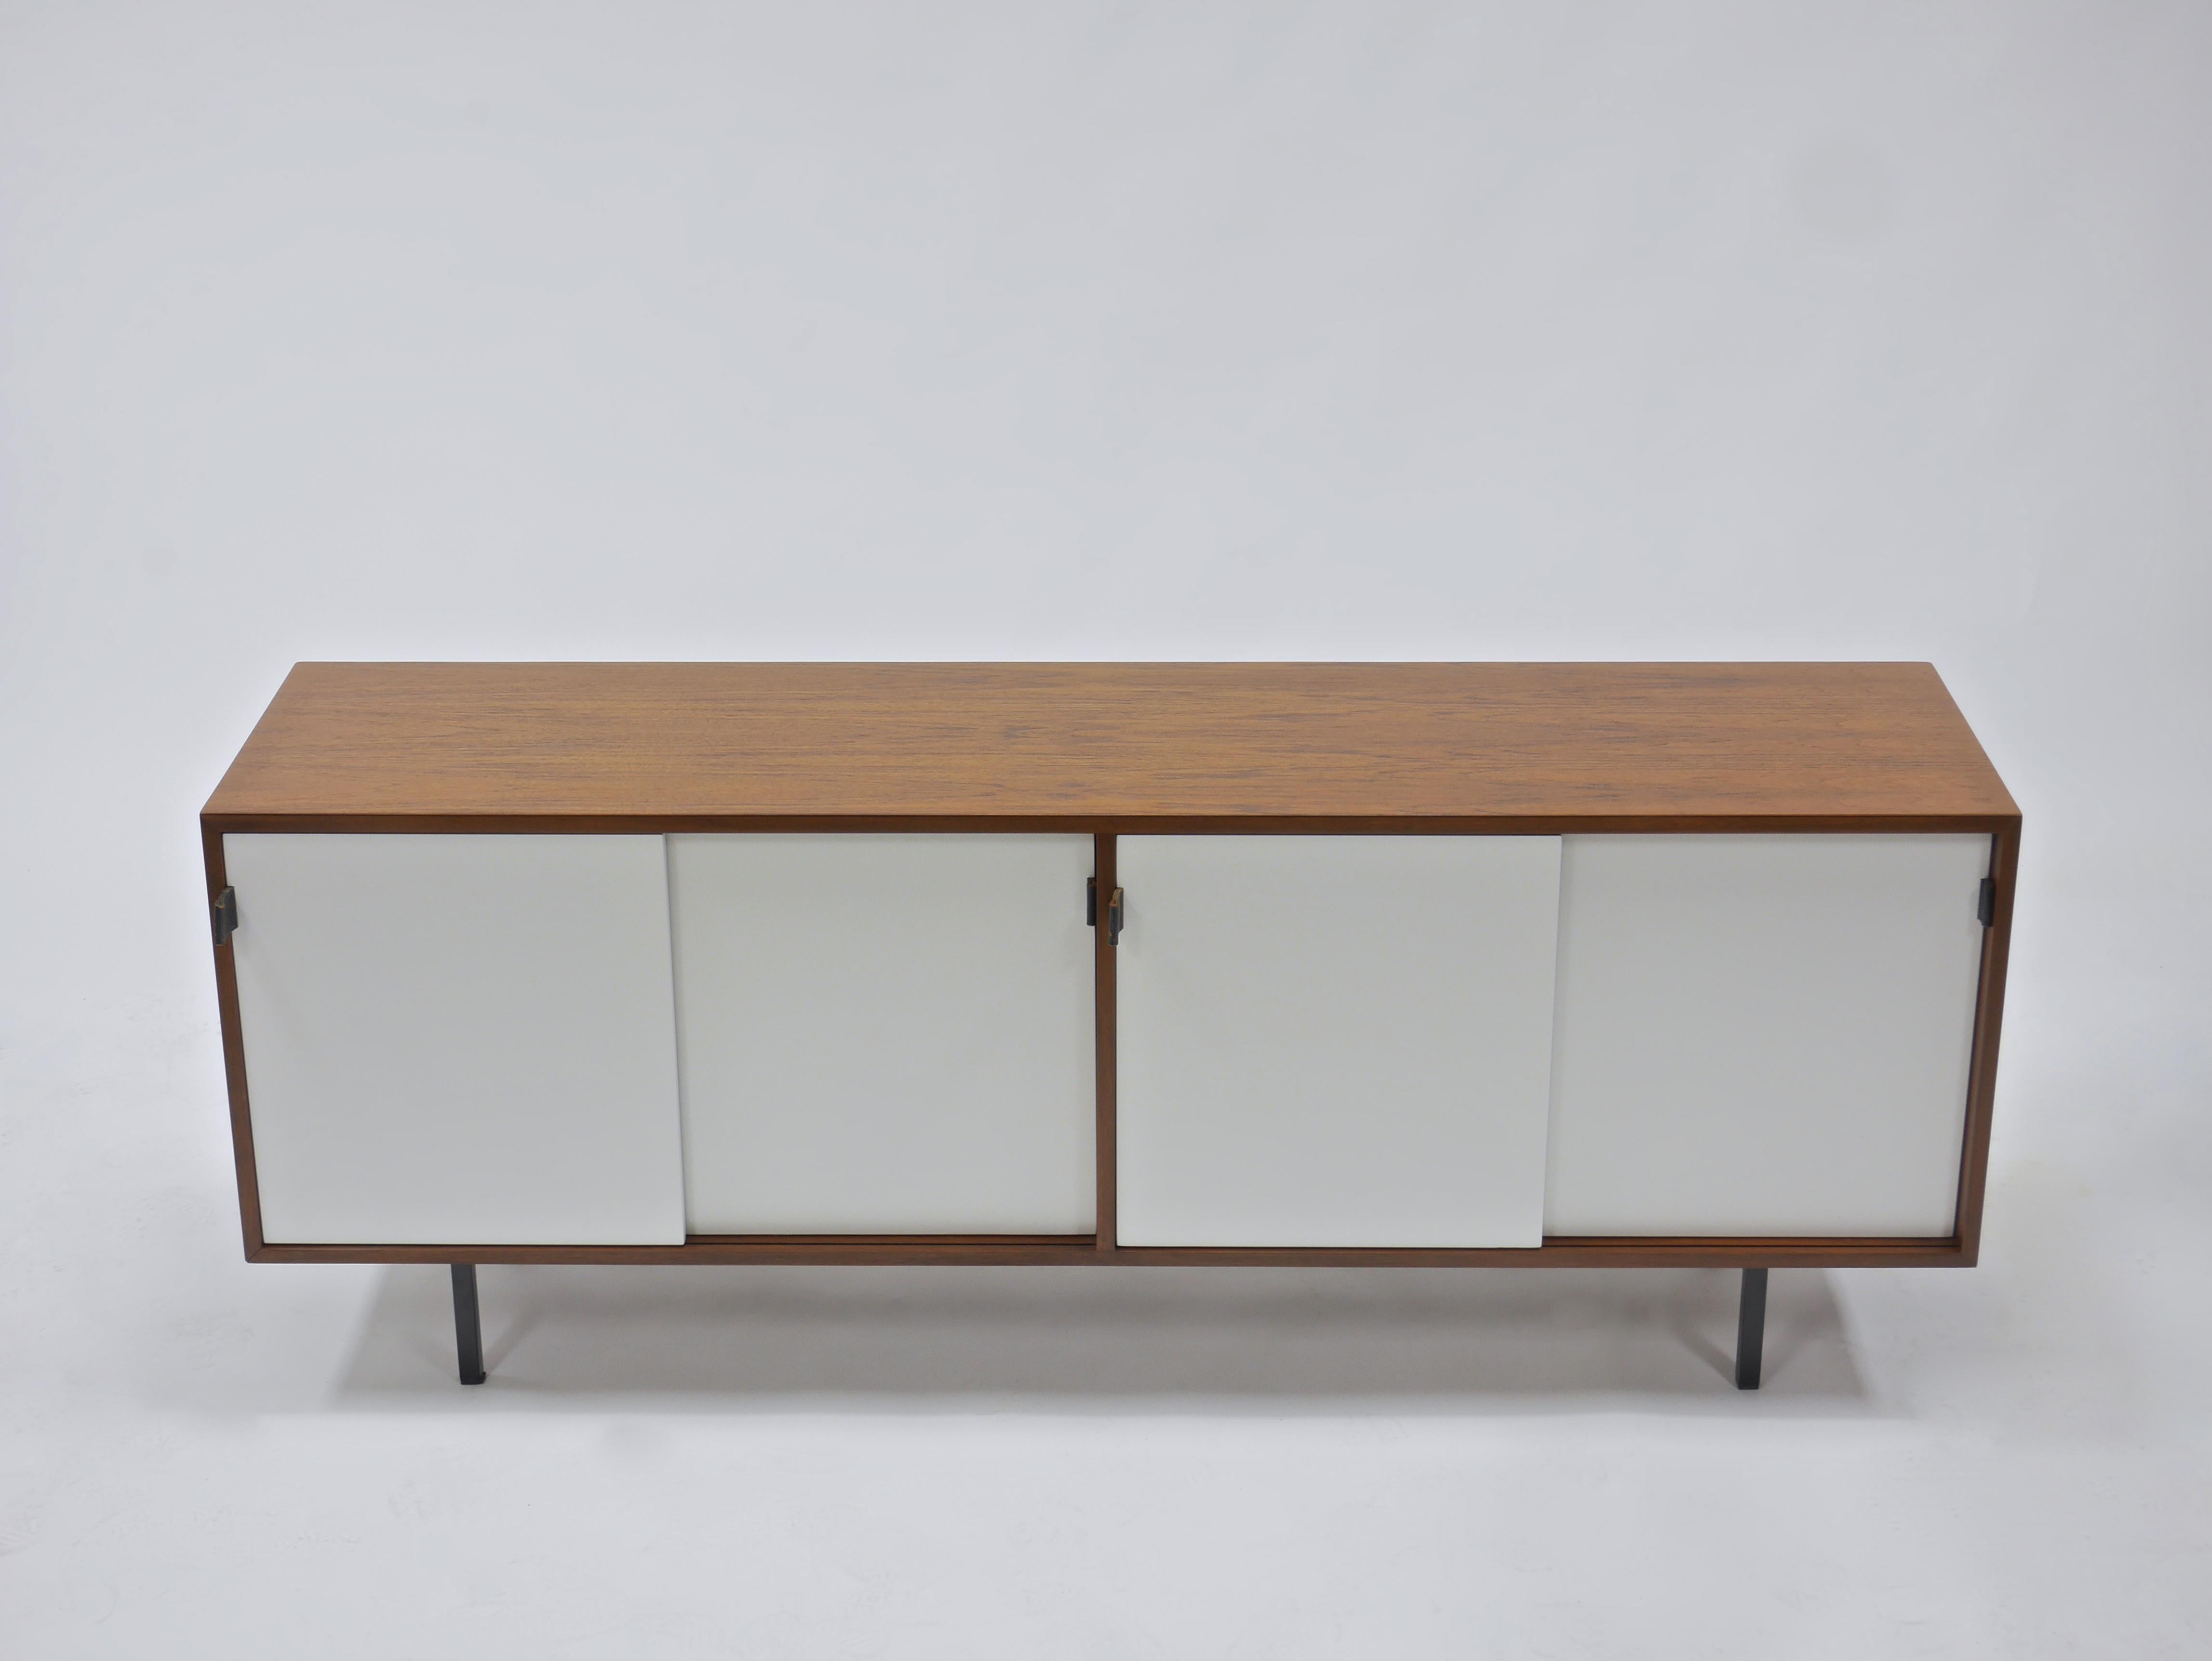 Credenza in walnut and white lacquer by Florence Knoll. Having leather pulls, steel legs and four oak lined compartments, each with a shelf. A handsome example with highly figured walnut veneers. Knoll Associates label. See our other listings for a